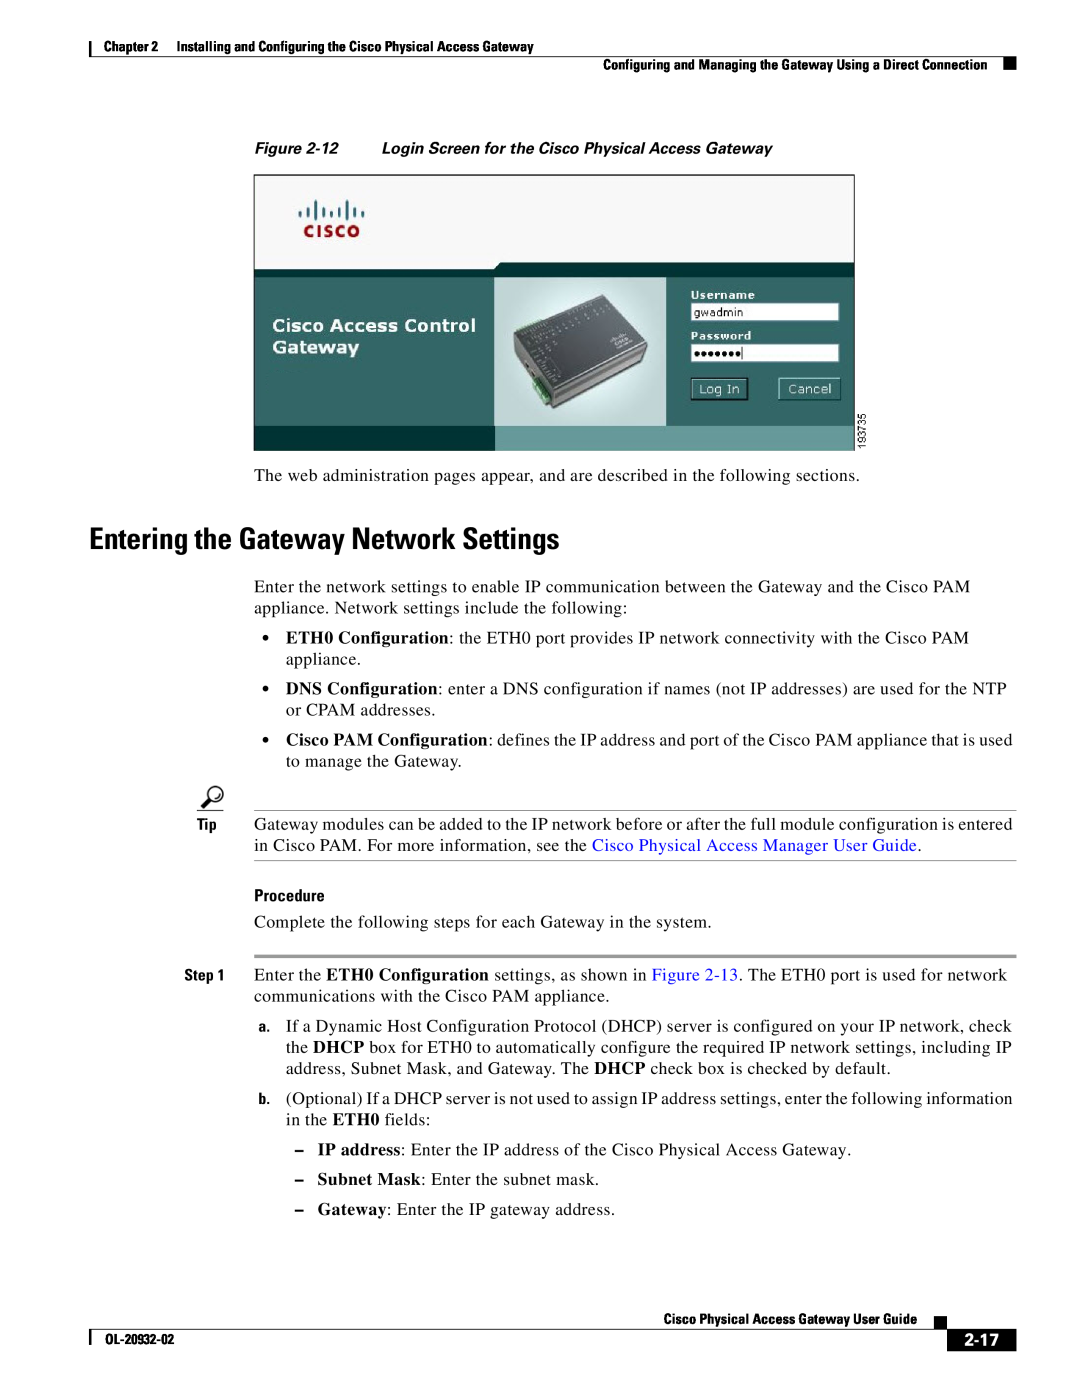 Cisco Systems OL-20932-02 manual Entering the Gateway Network Settings, 2-17 